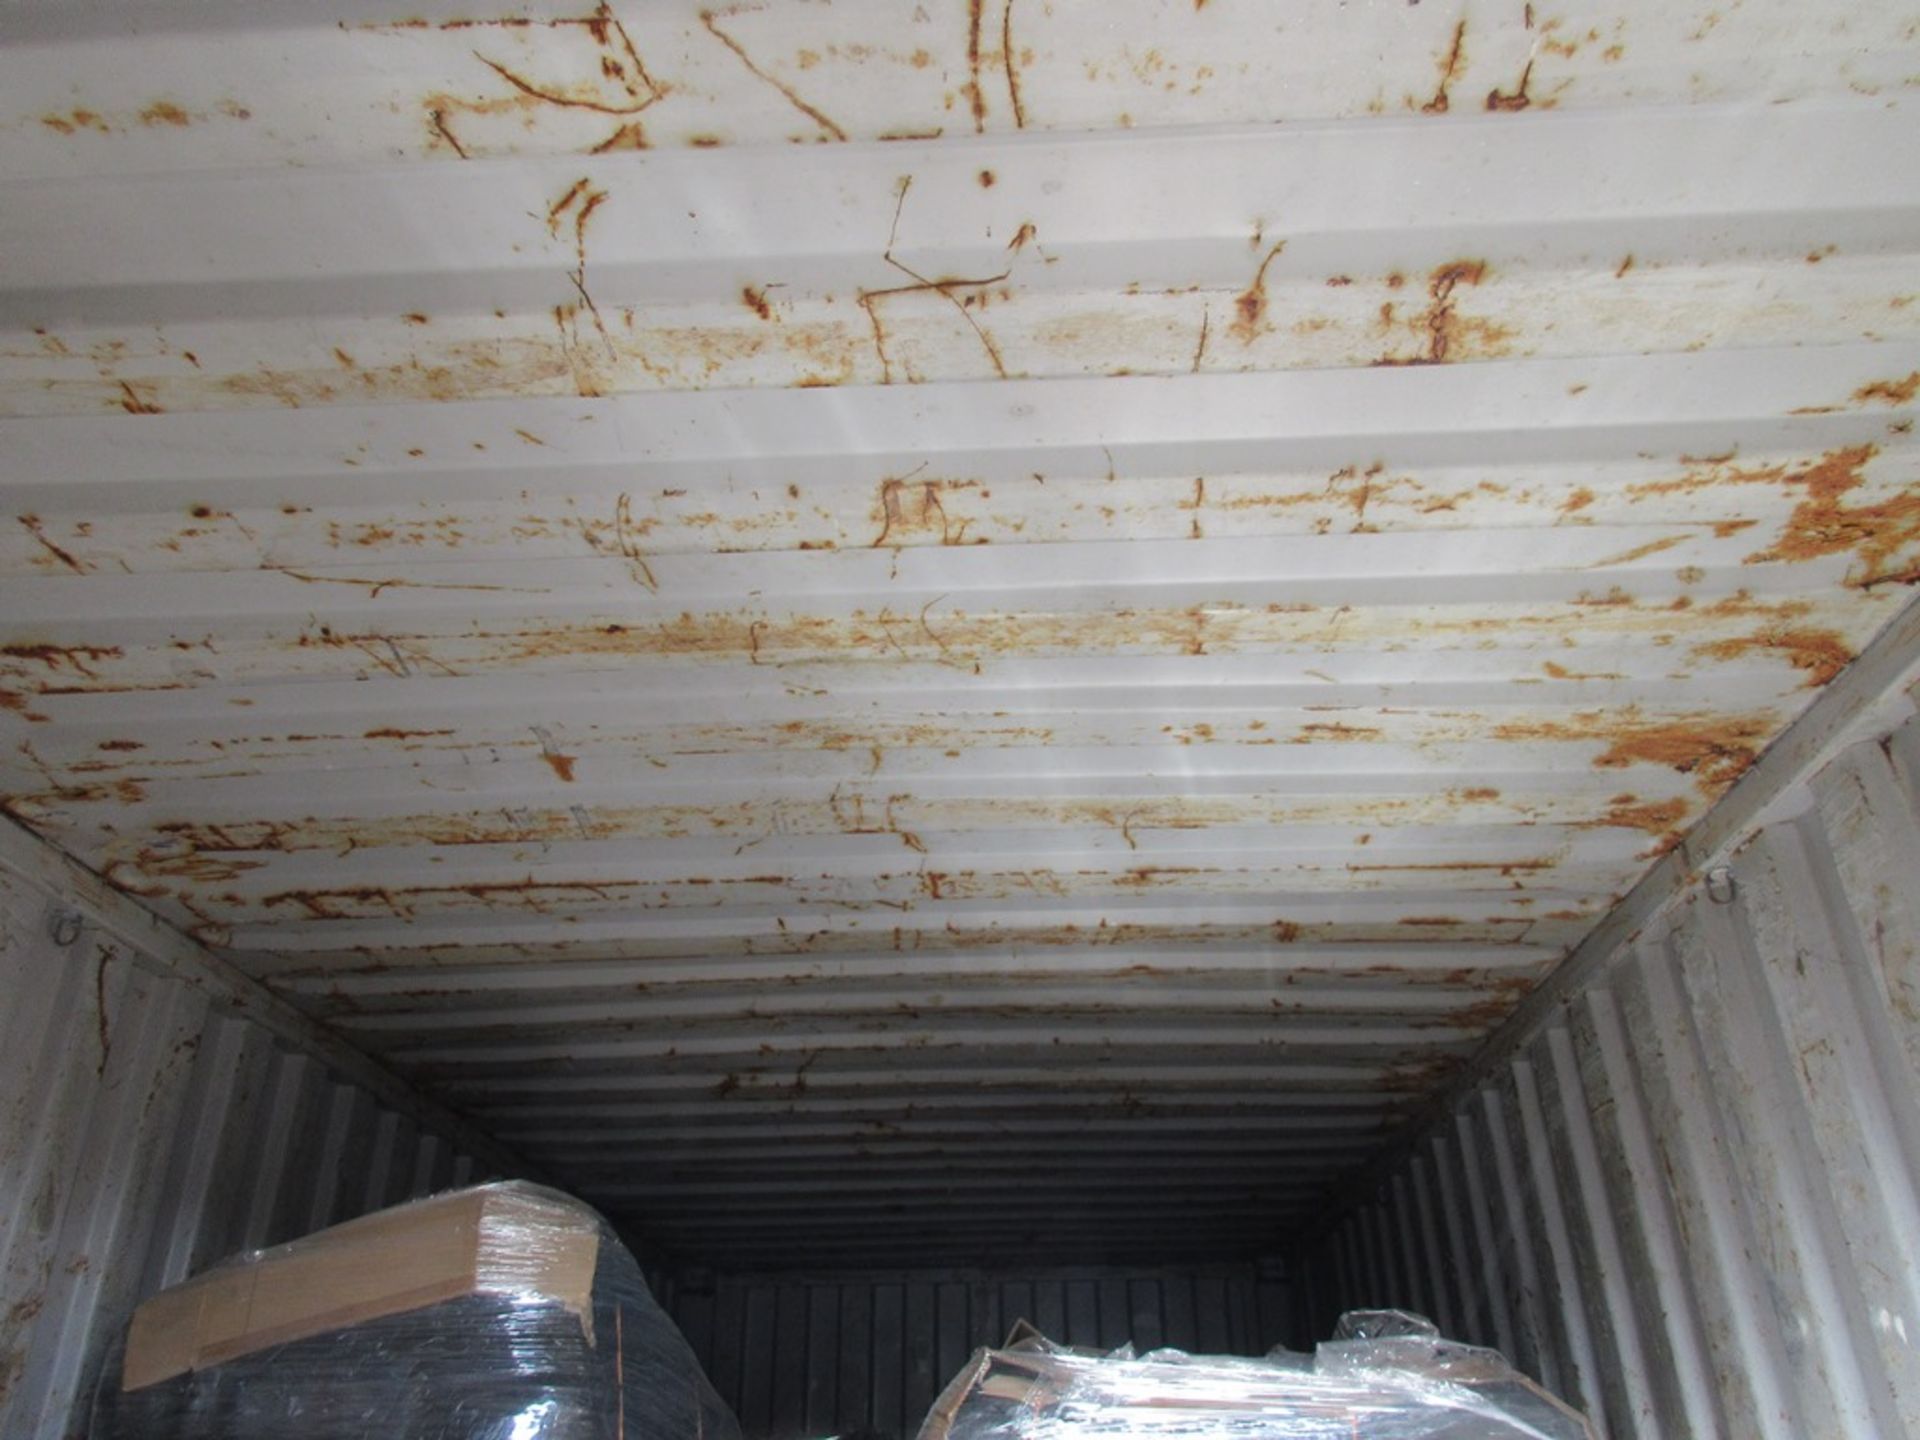 Export type shipping container, 20ft - no floor - Image 3 of 4